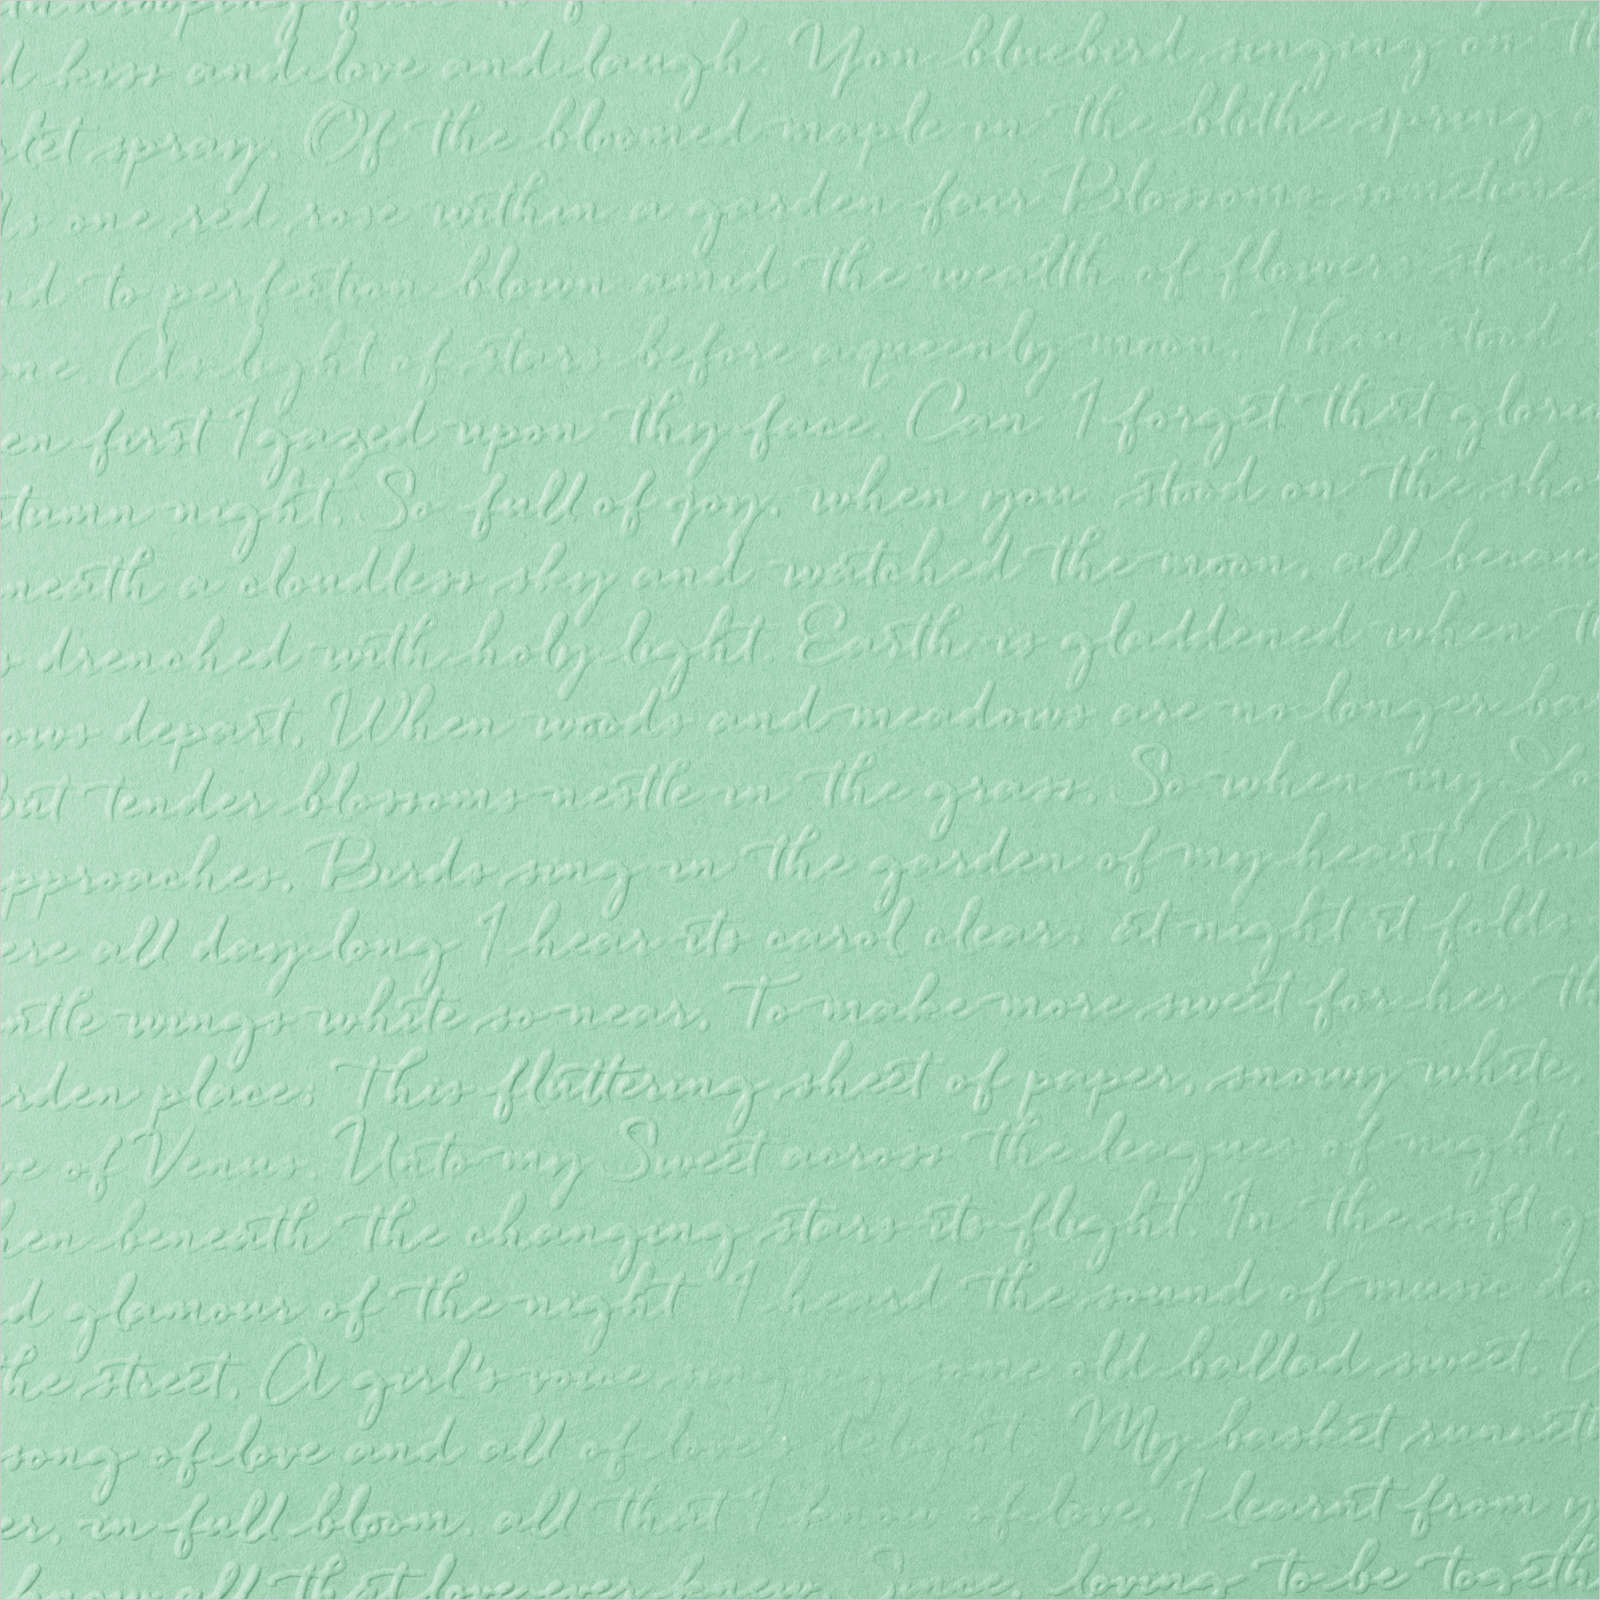 Scripty 3D Embossing Folder Makes Great Card Backgrounds